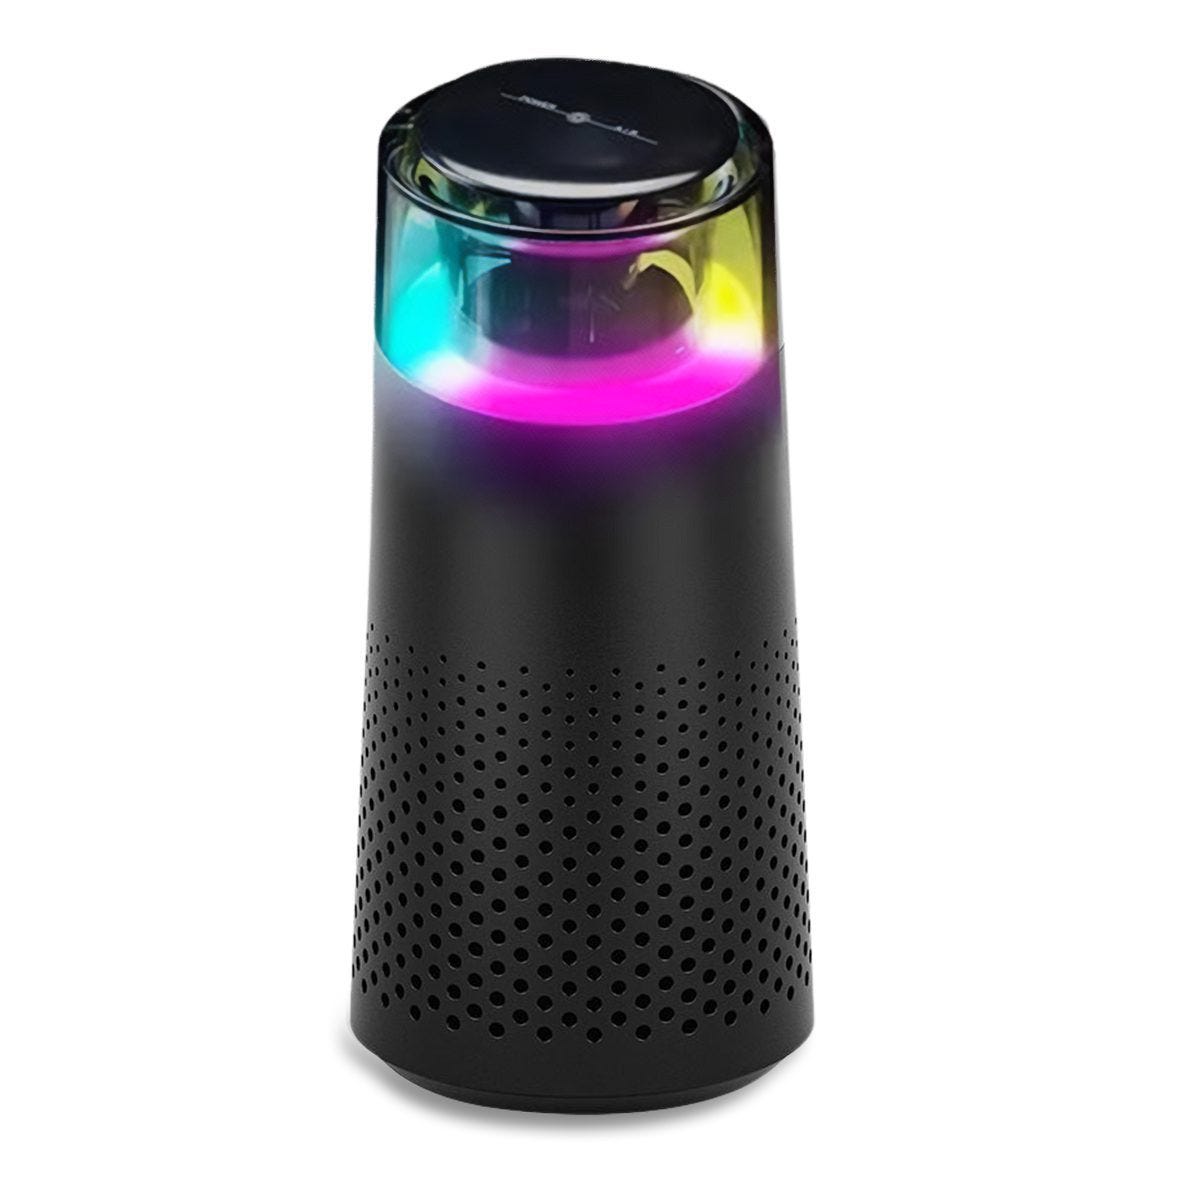 Cylindrical HEPA air purifier with a perforated black body and a color-changing LED light at the top.